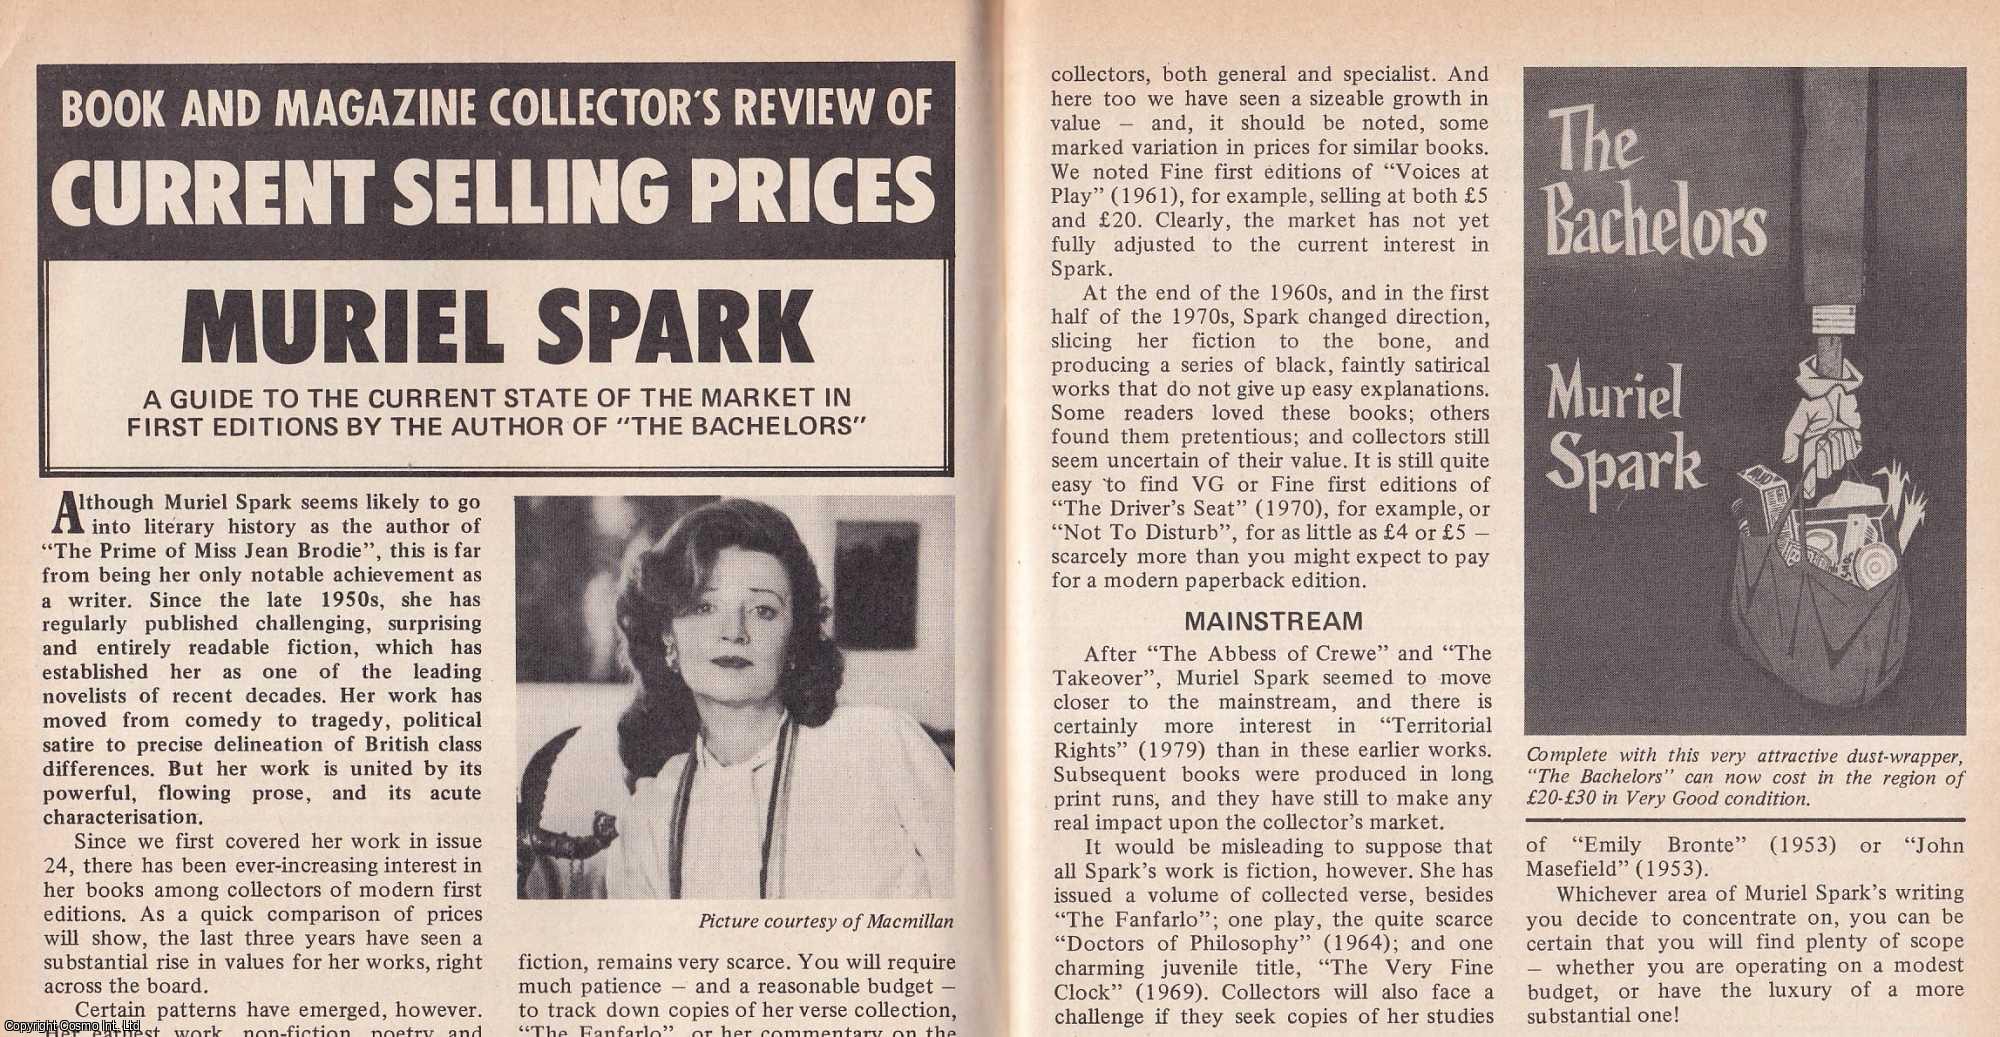 Unstated - Muriel Spark : A Guide to The Current State of The Market in First Editions. This is an original article separated from an issue of The Book & Magazine Collector publication.